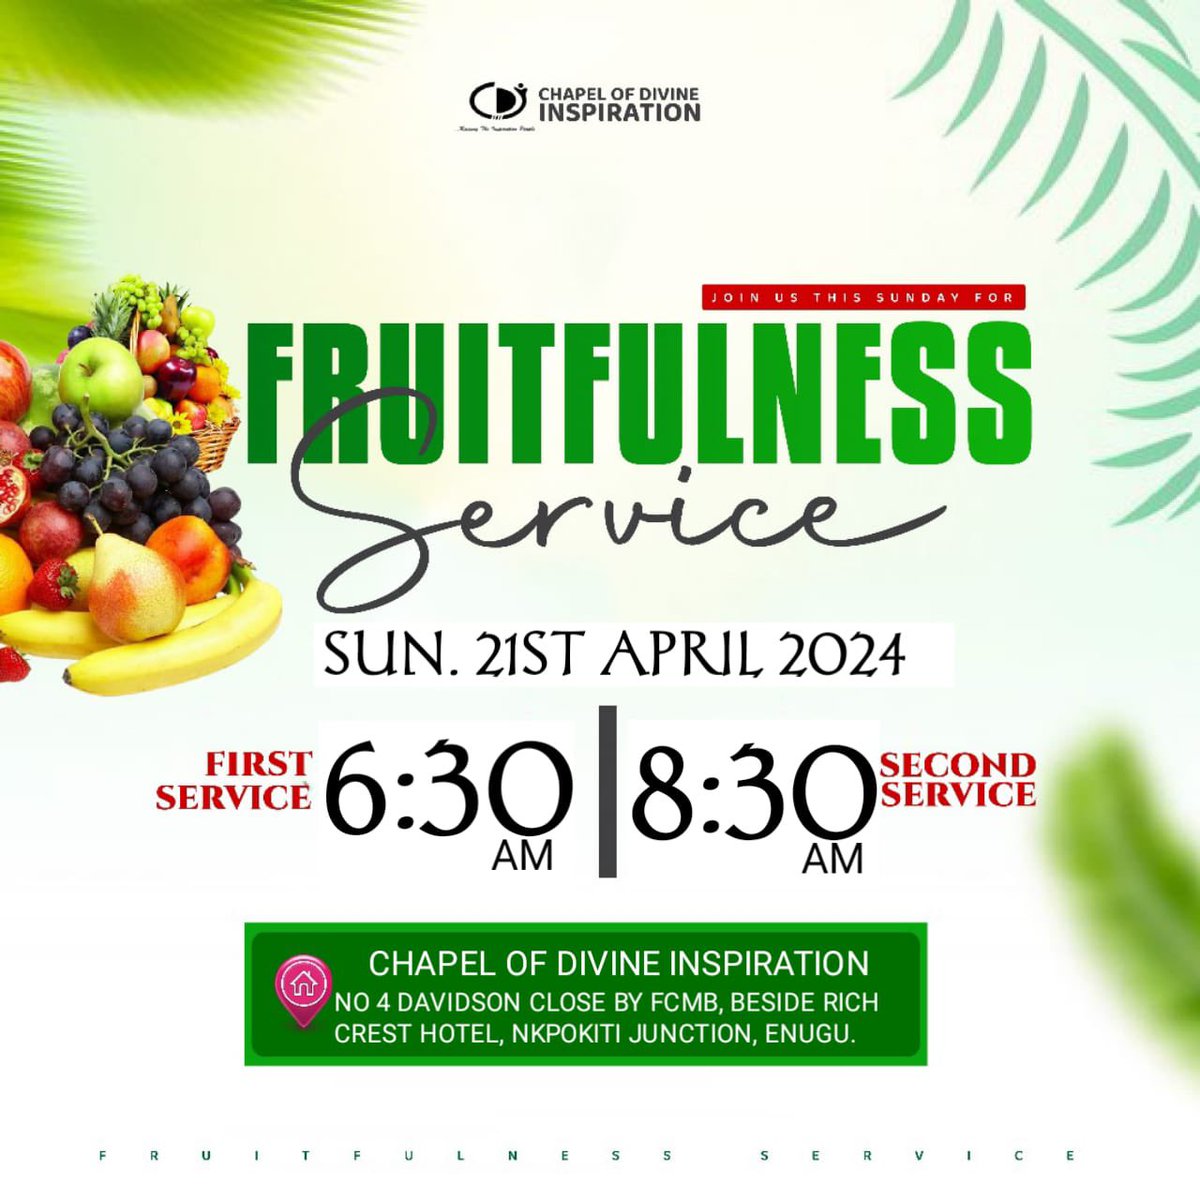 Join us tomorrow at our Fruitfulness Service.
First service starts at exactly 6;30am and second service starts at 8:30am.
This services are special; do not come alone.
See you in church.

#TheCDIChurch 
#pstkcahaiwe 
#fruitfulness2024